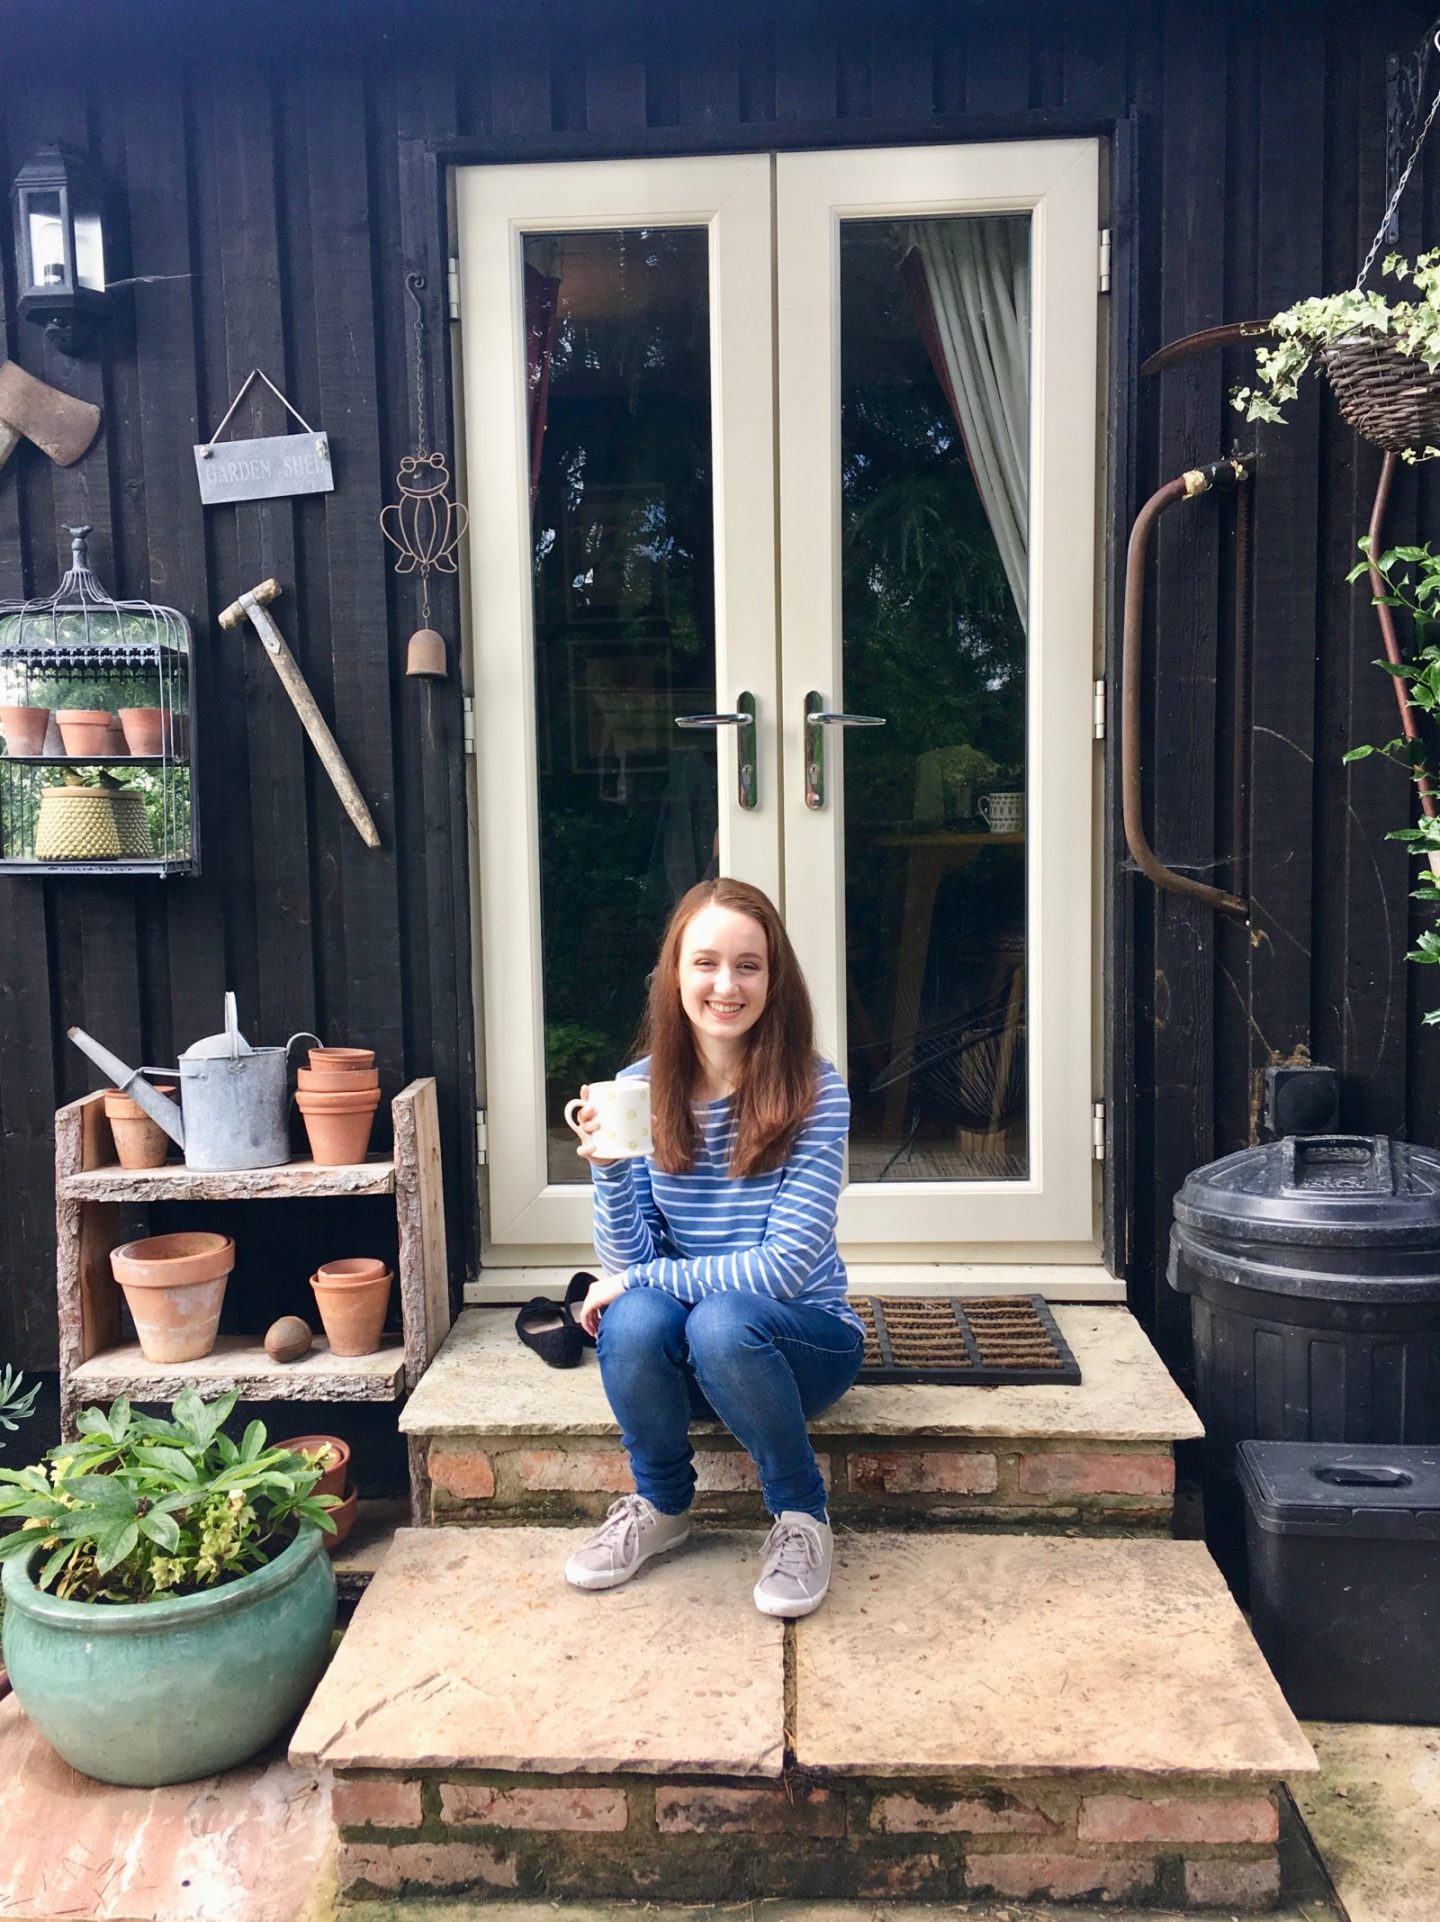 pippa sat on steps of garden shed, holding cup of tea and smiling